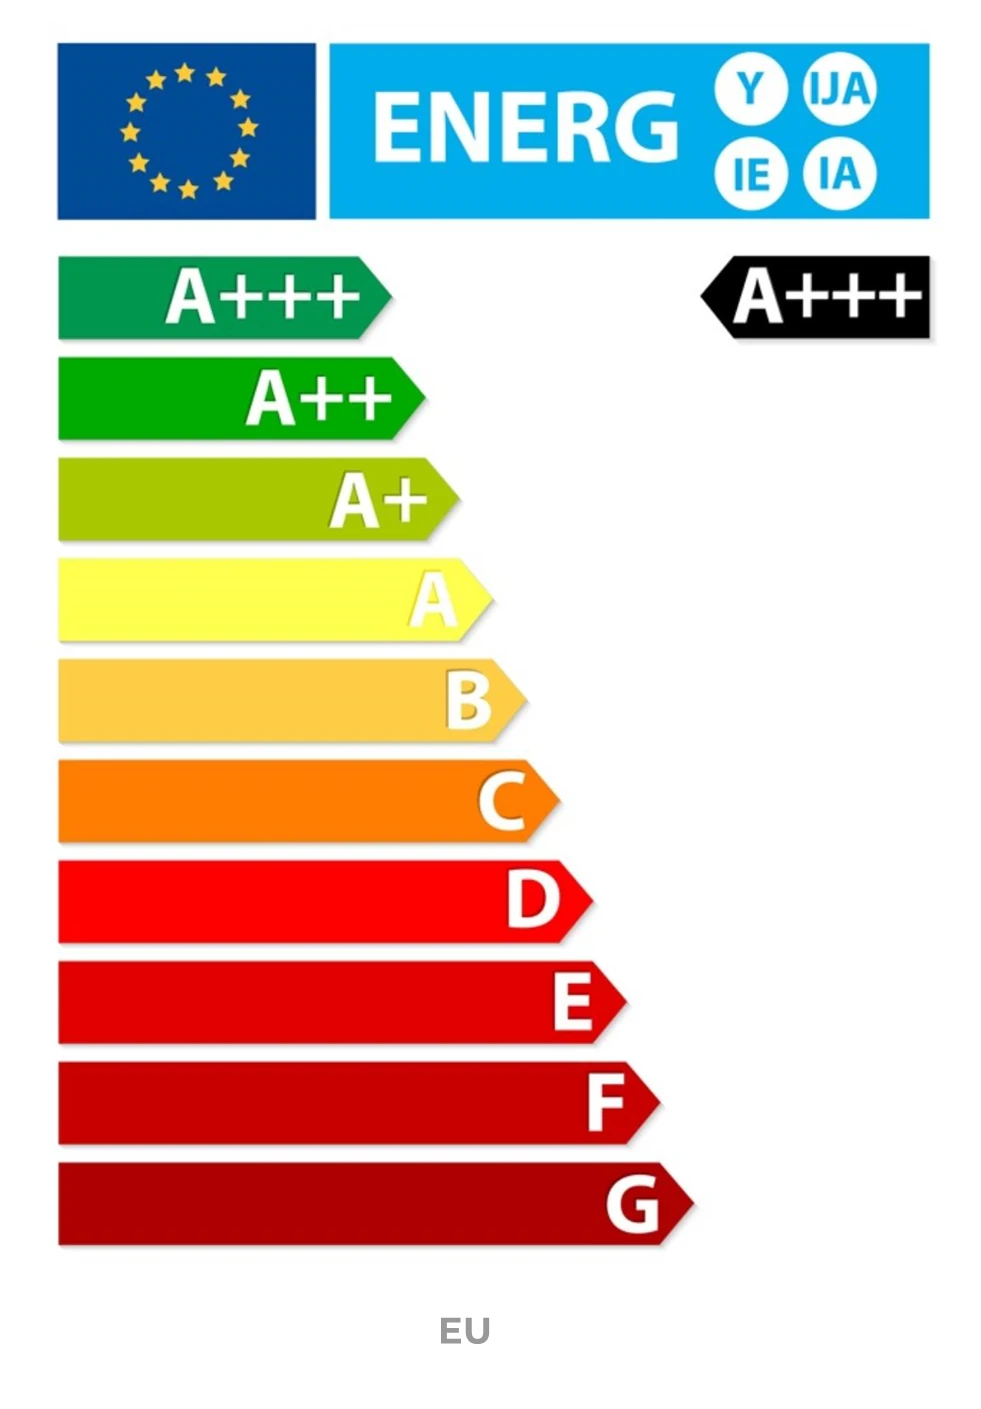 Example of how an energy label looks like in the EU